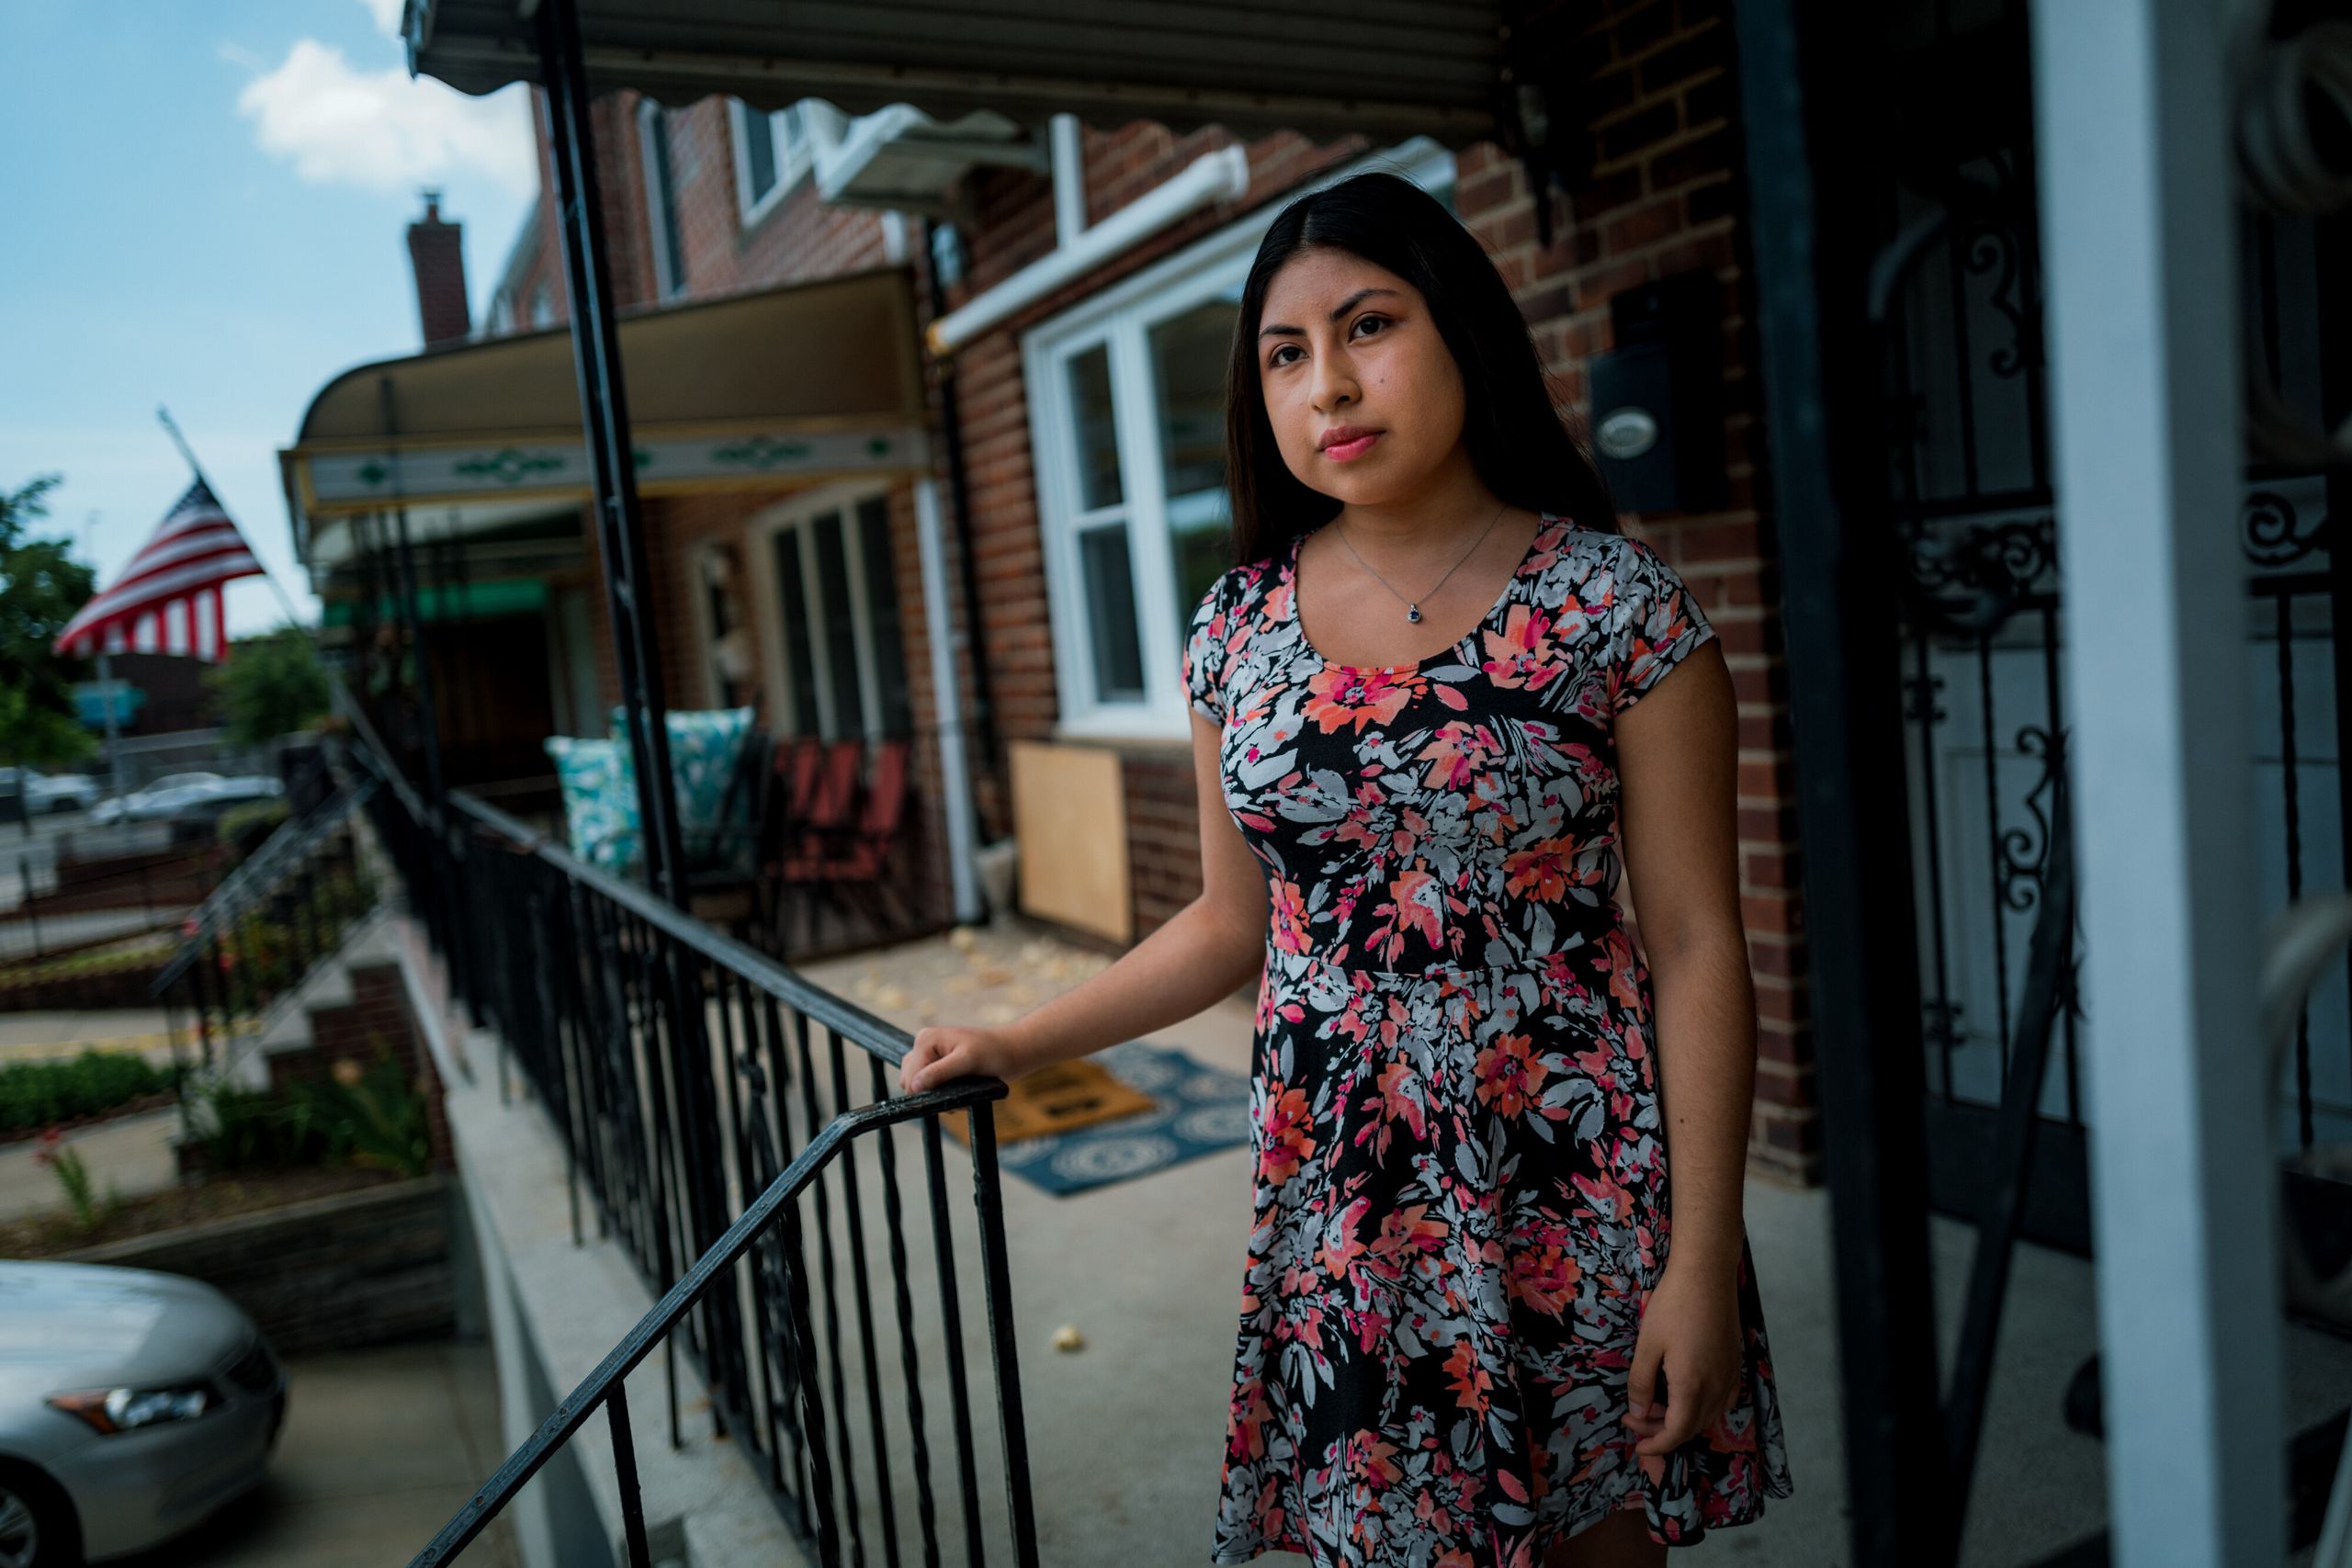 Tiffany Palaguachi at her home in Queens. In February, her whole family tested positive for COVID-19, and she spent weeks tak